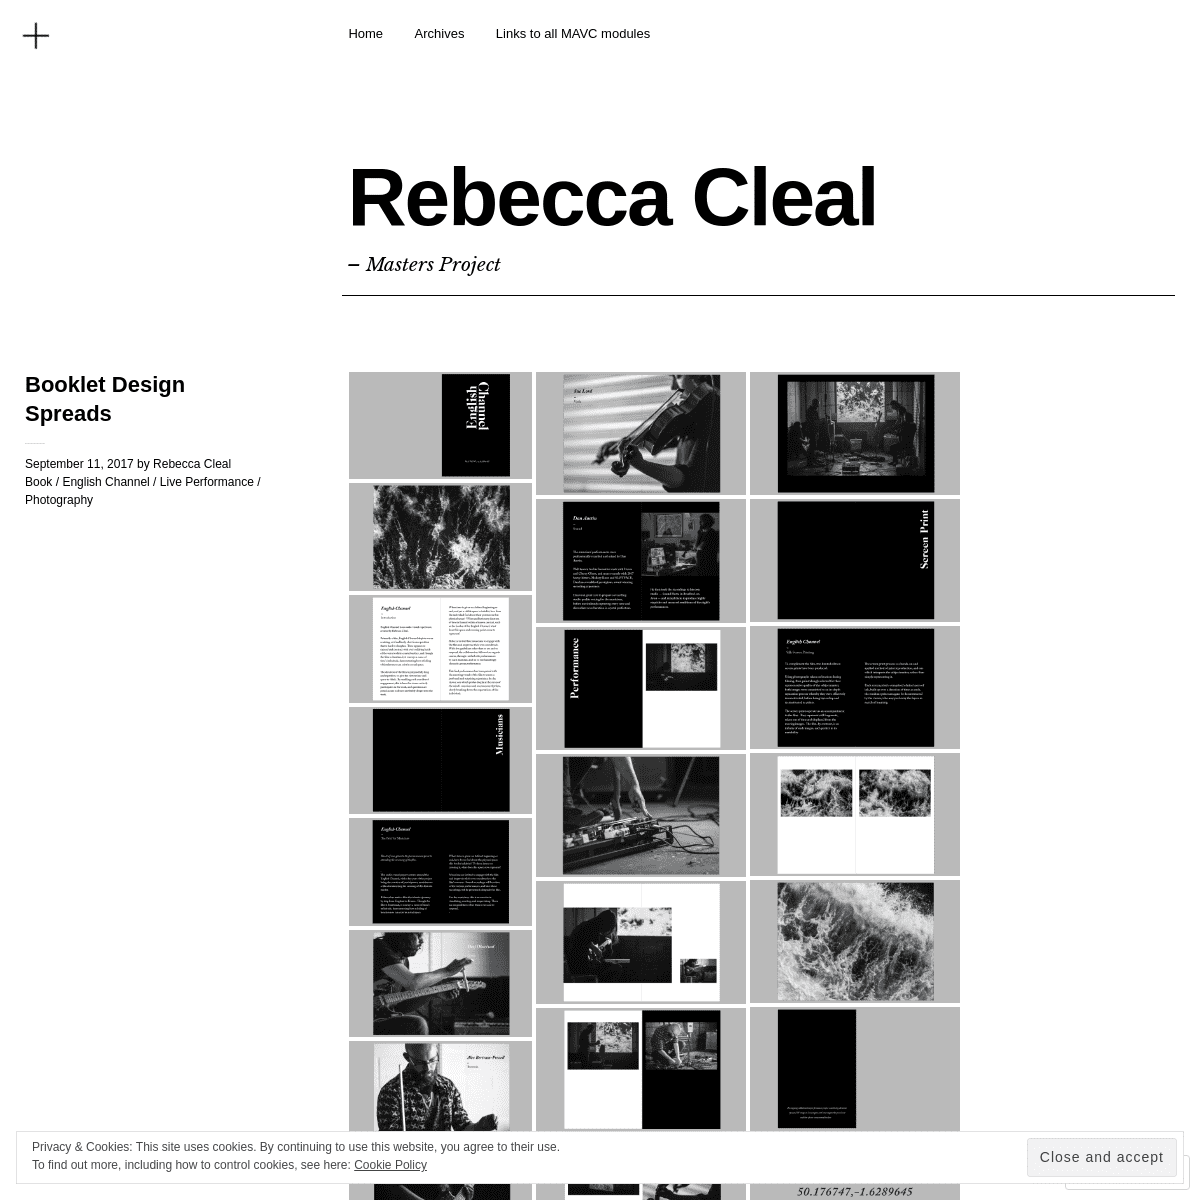 A complete backup of rebeccaclealmavcmastersproject.wordpress.com